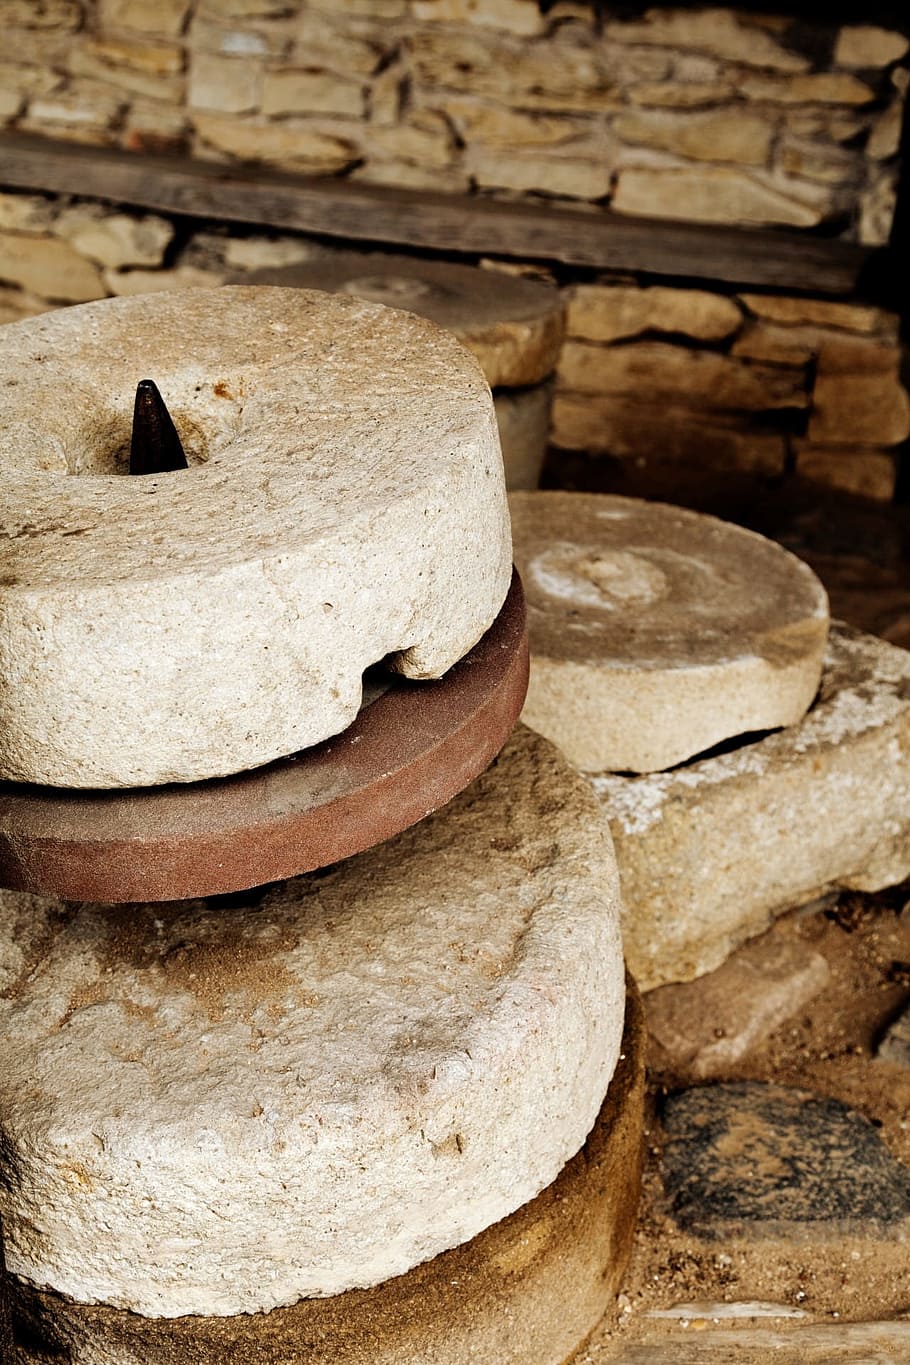 millstone, mill, old, stone, ancient, grinding, round, grindstone, medieval, windmill